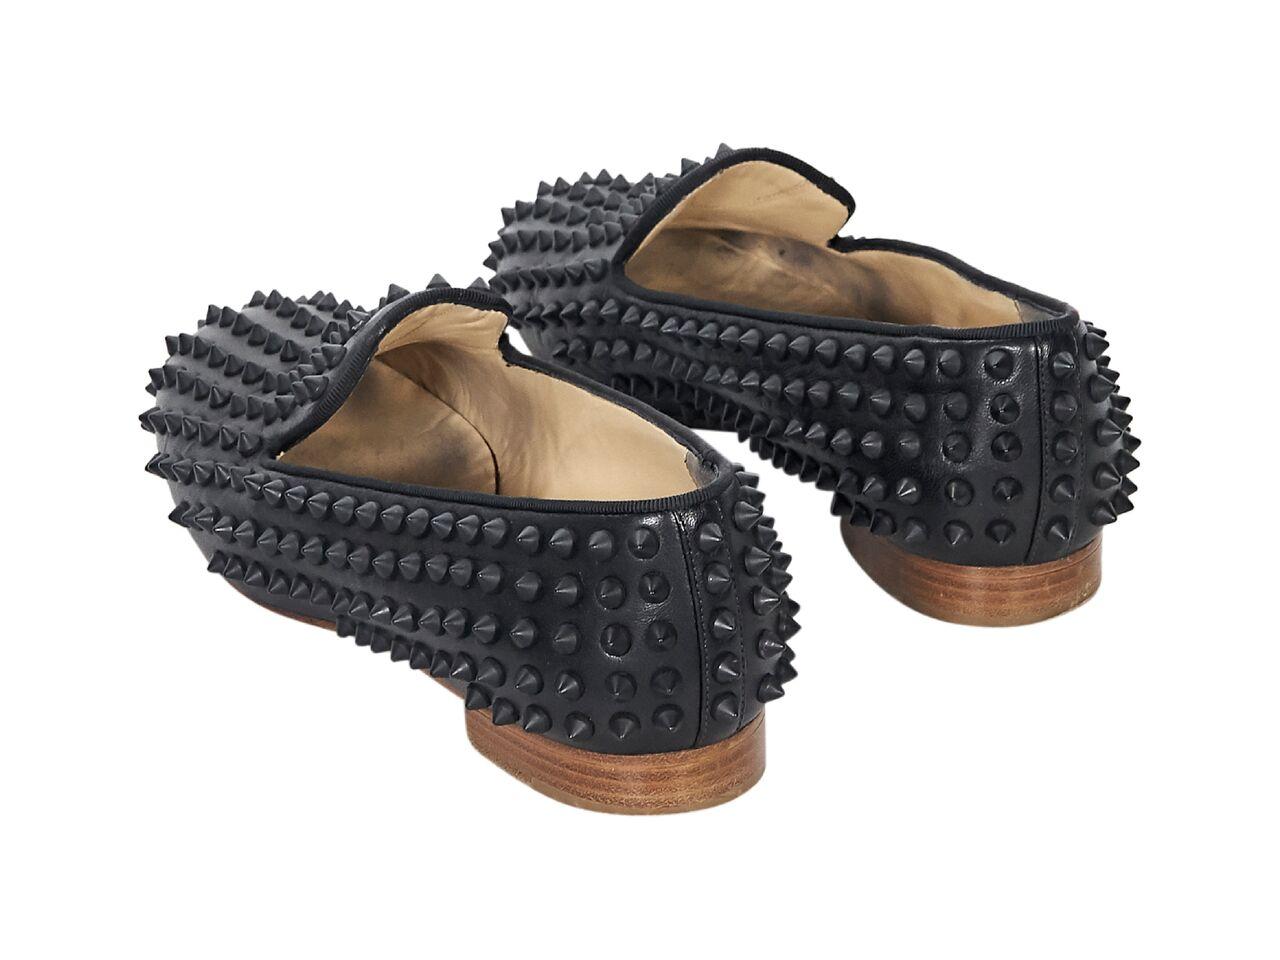 Product details:  Black leather studded loafers by Christian Louboutin.  Round toe.  Low stacked heel.  Iconic red sole.  Slip-on style. 
Condition: Pre-owned. Very good. 
Est. Retail $ 1,095.00